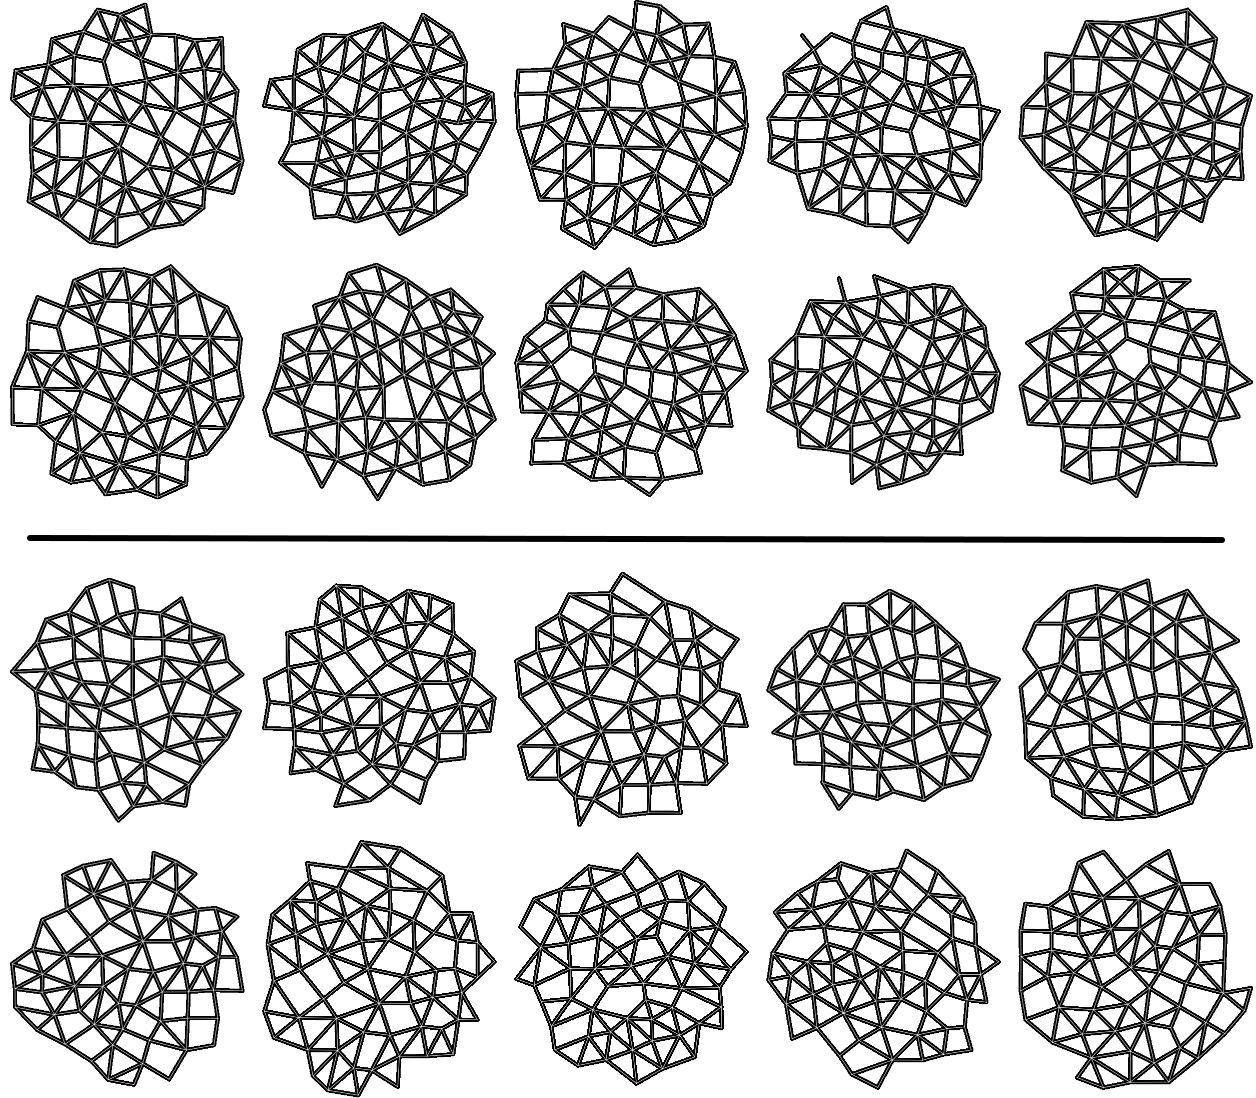 Top: ten example morphological graphs extracted from wild-type SAM images. Bottom: ten morphological graphs drawn from trm678 mutant images.